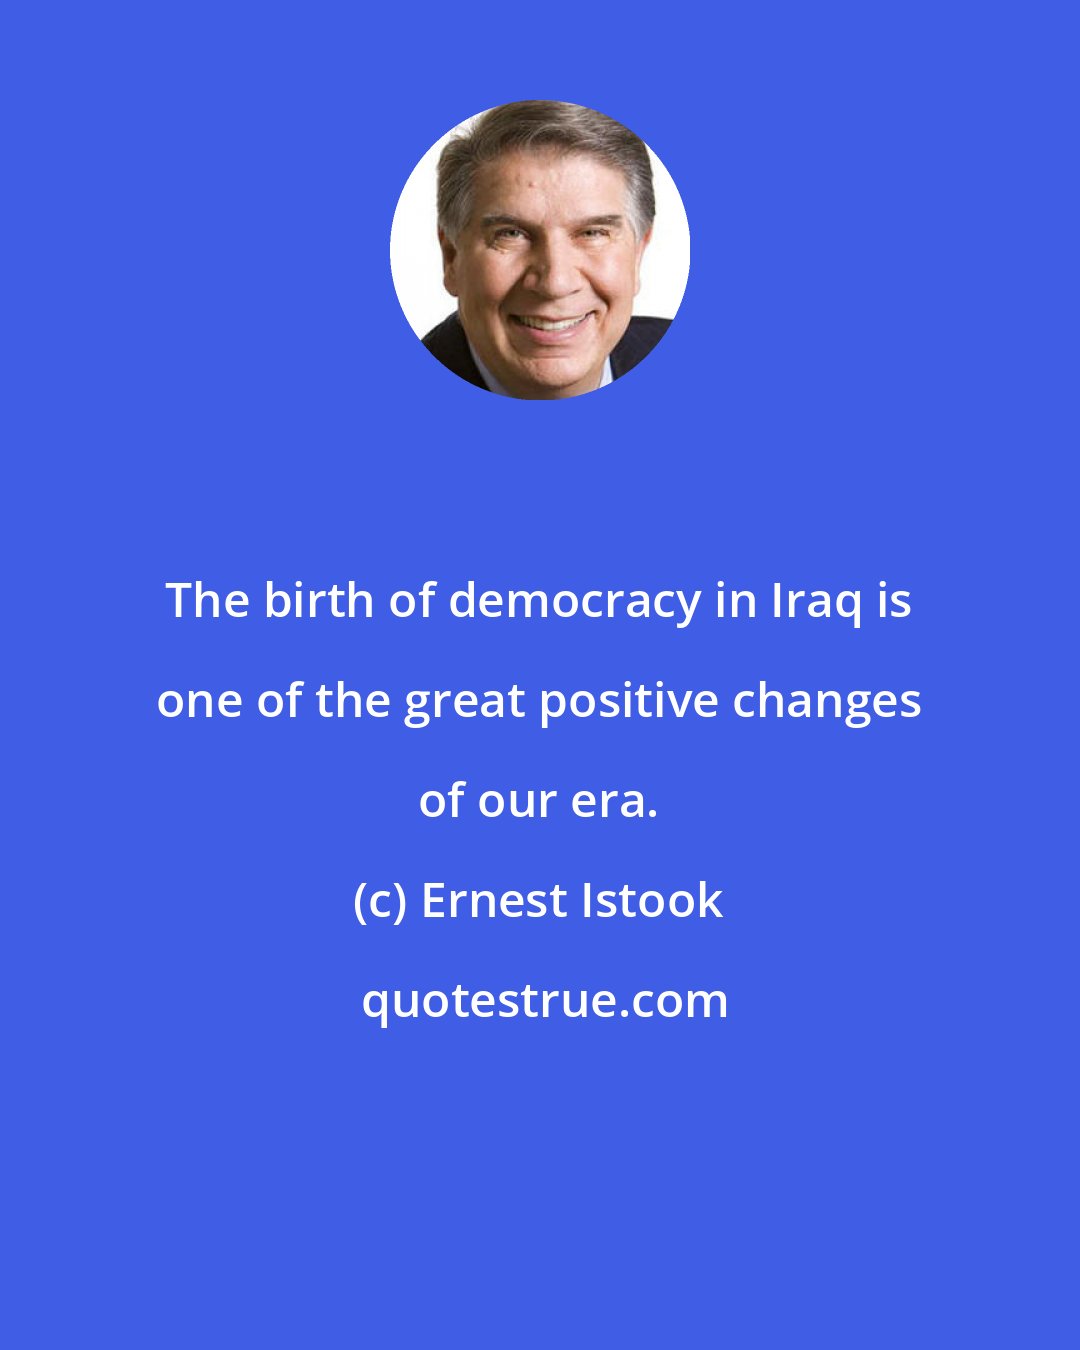 Ernest Istook: The birth of democracy in Iraq is one of the great positive changes of our era.